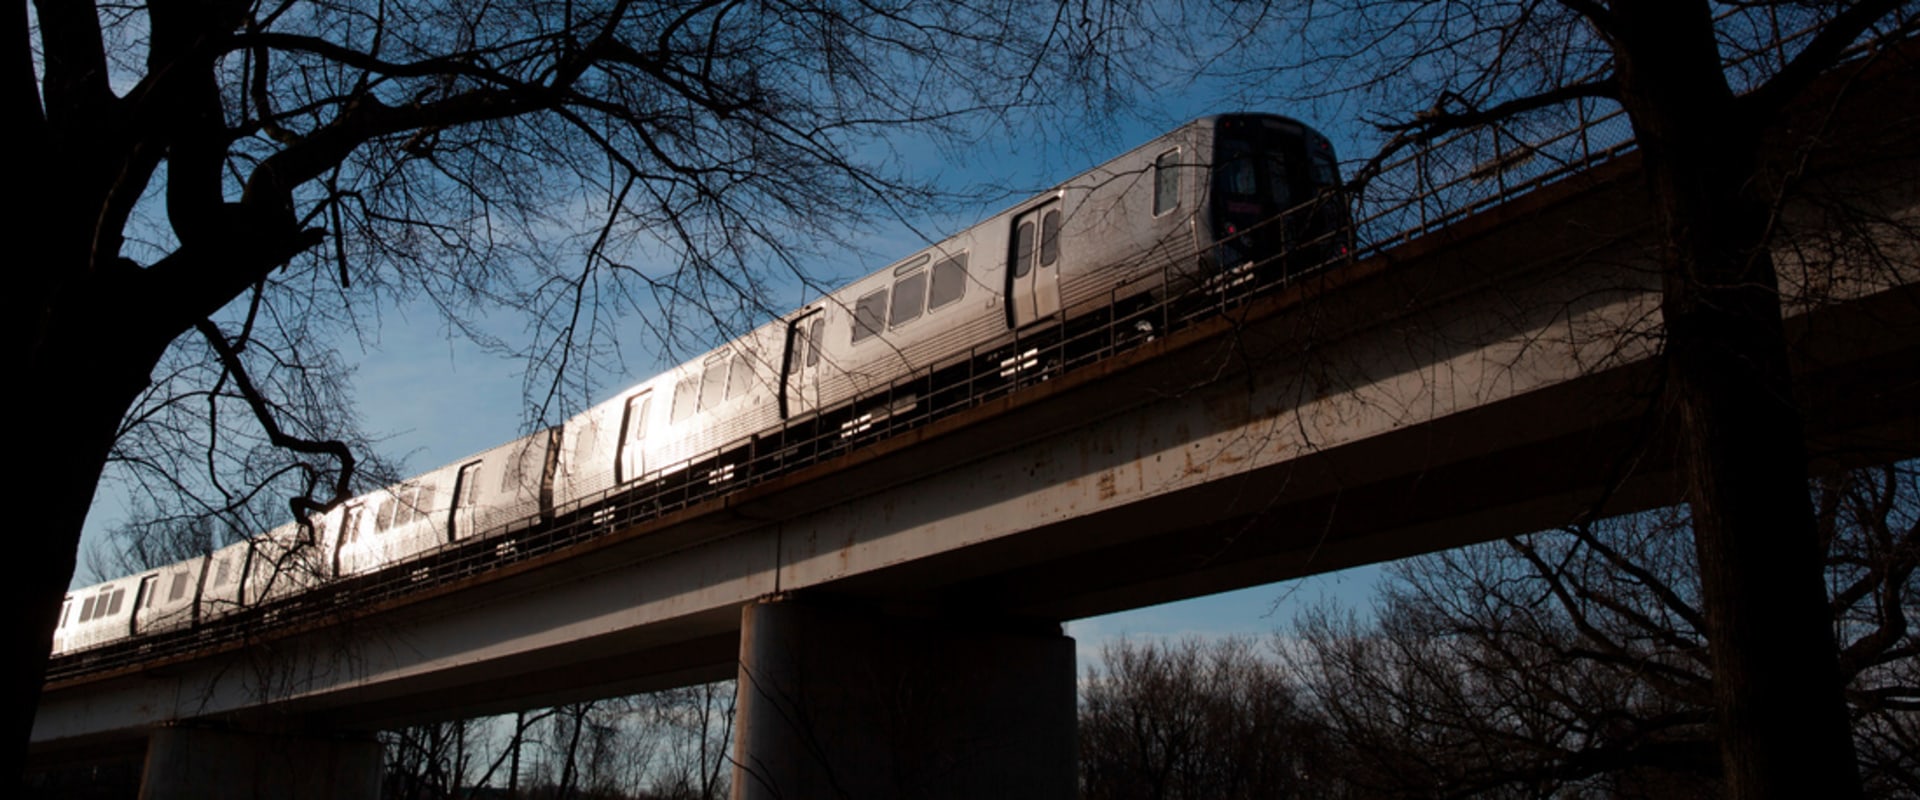 The Benefits of Investing in Clean Public Transportation in Northern Virginia